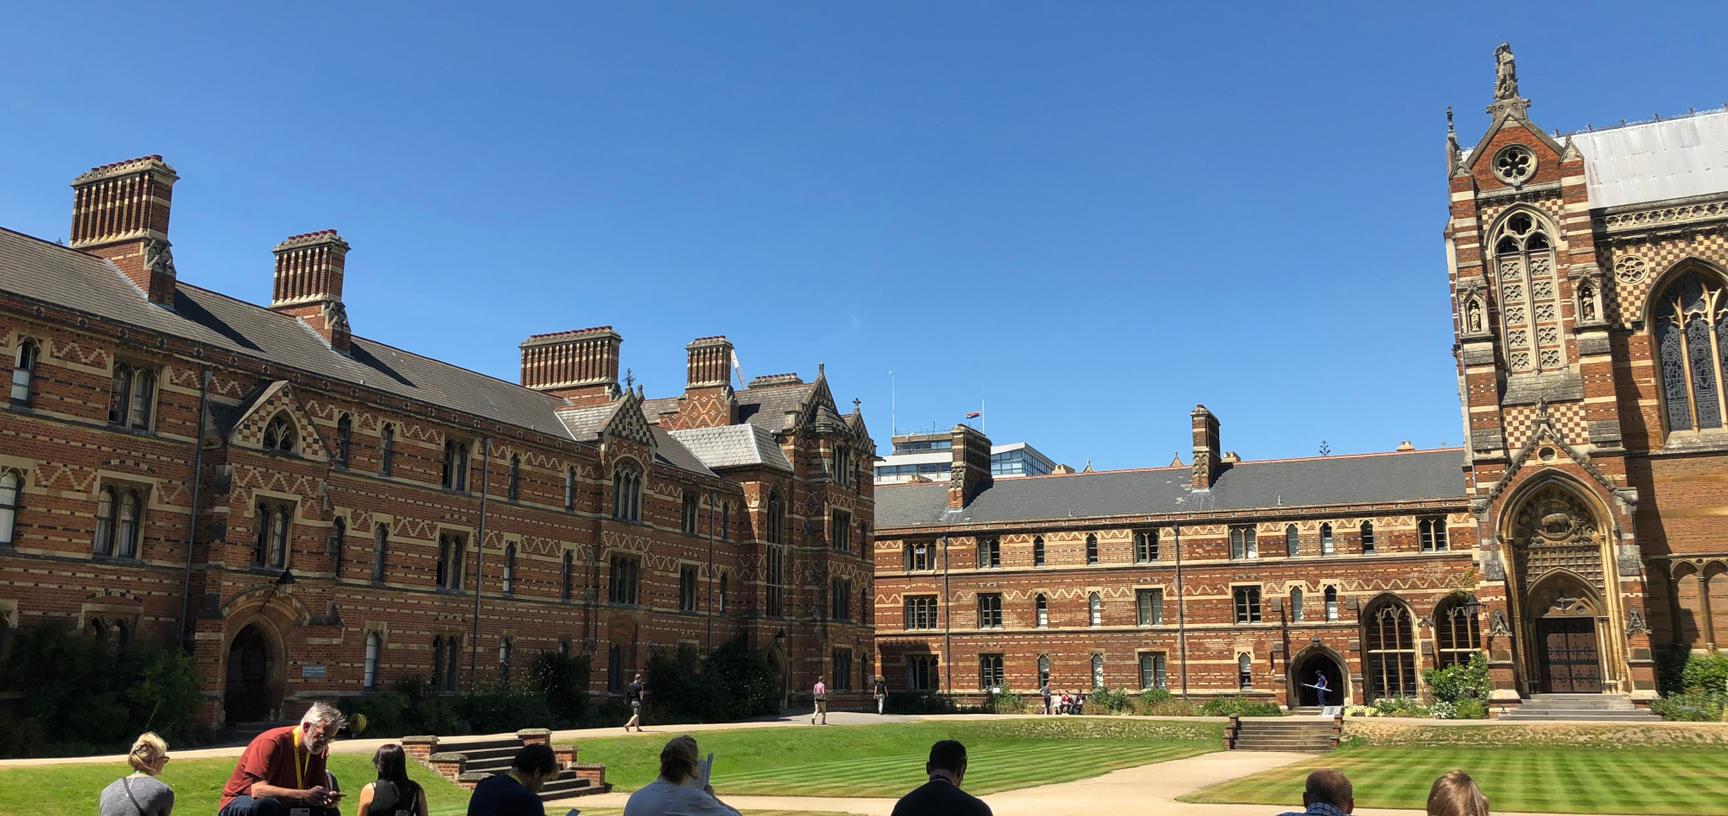 Students of the Digital Humanities @ Oxford Summer School enjoy a break in the sunlit courtyard of Keble College, Oxford